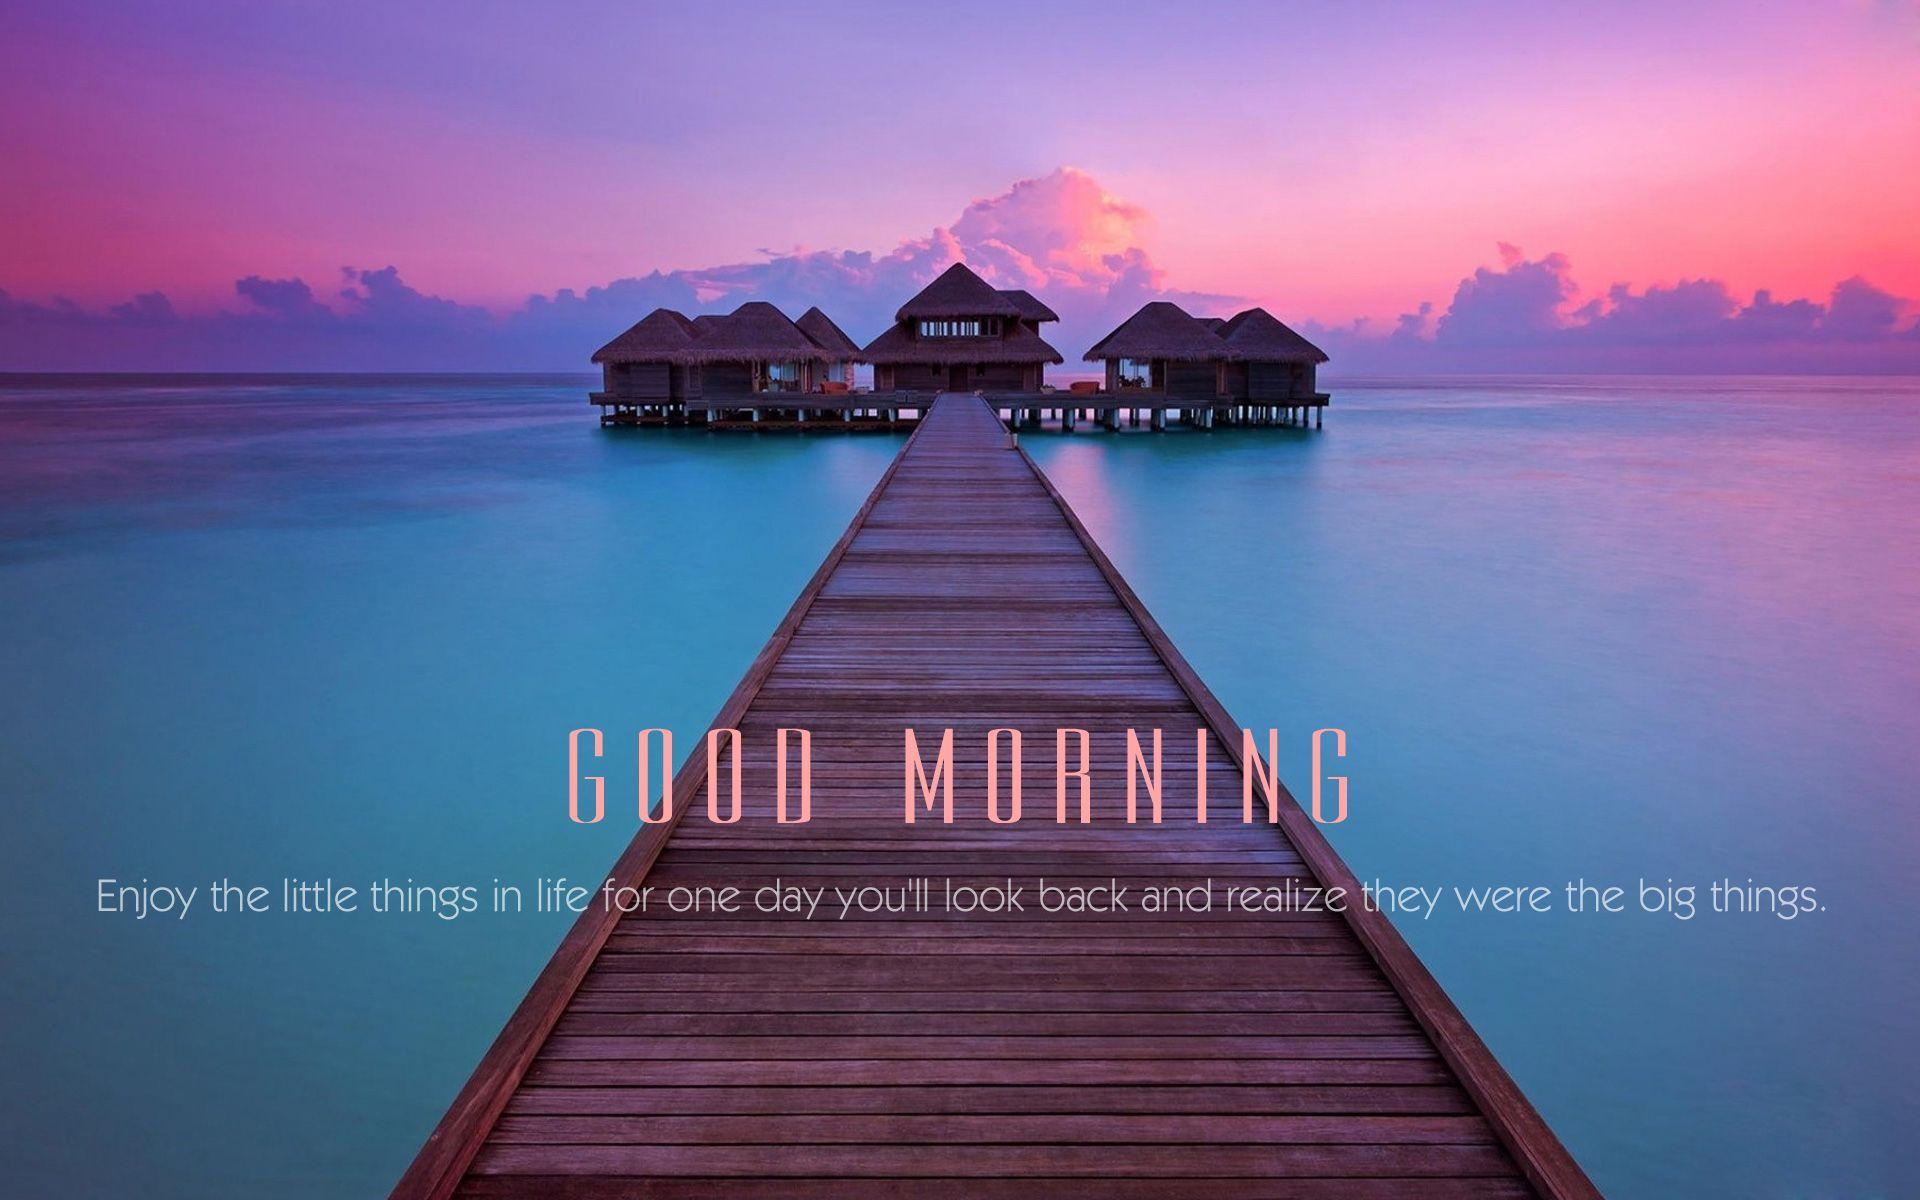 good morning HD wallpaper in 1080p Good Morning, Have a nice